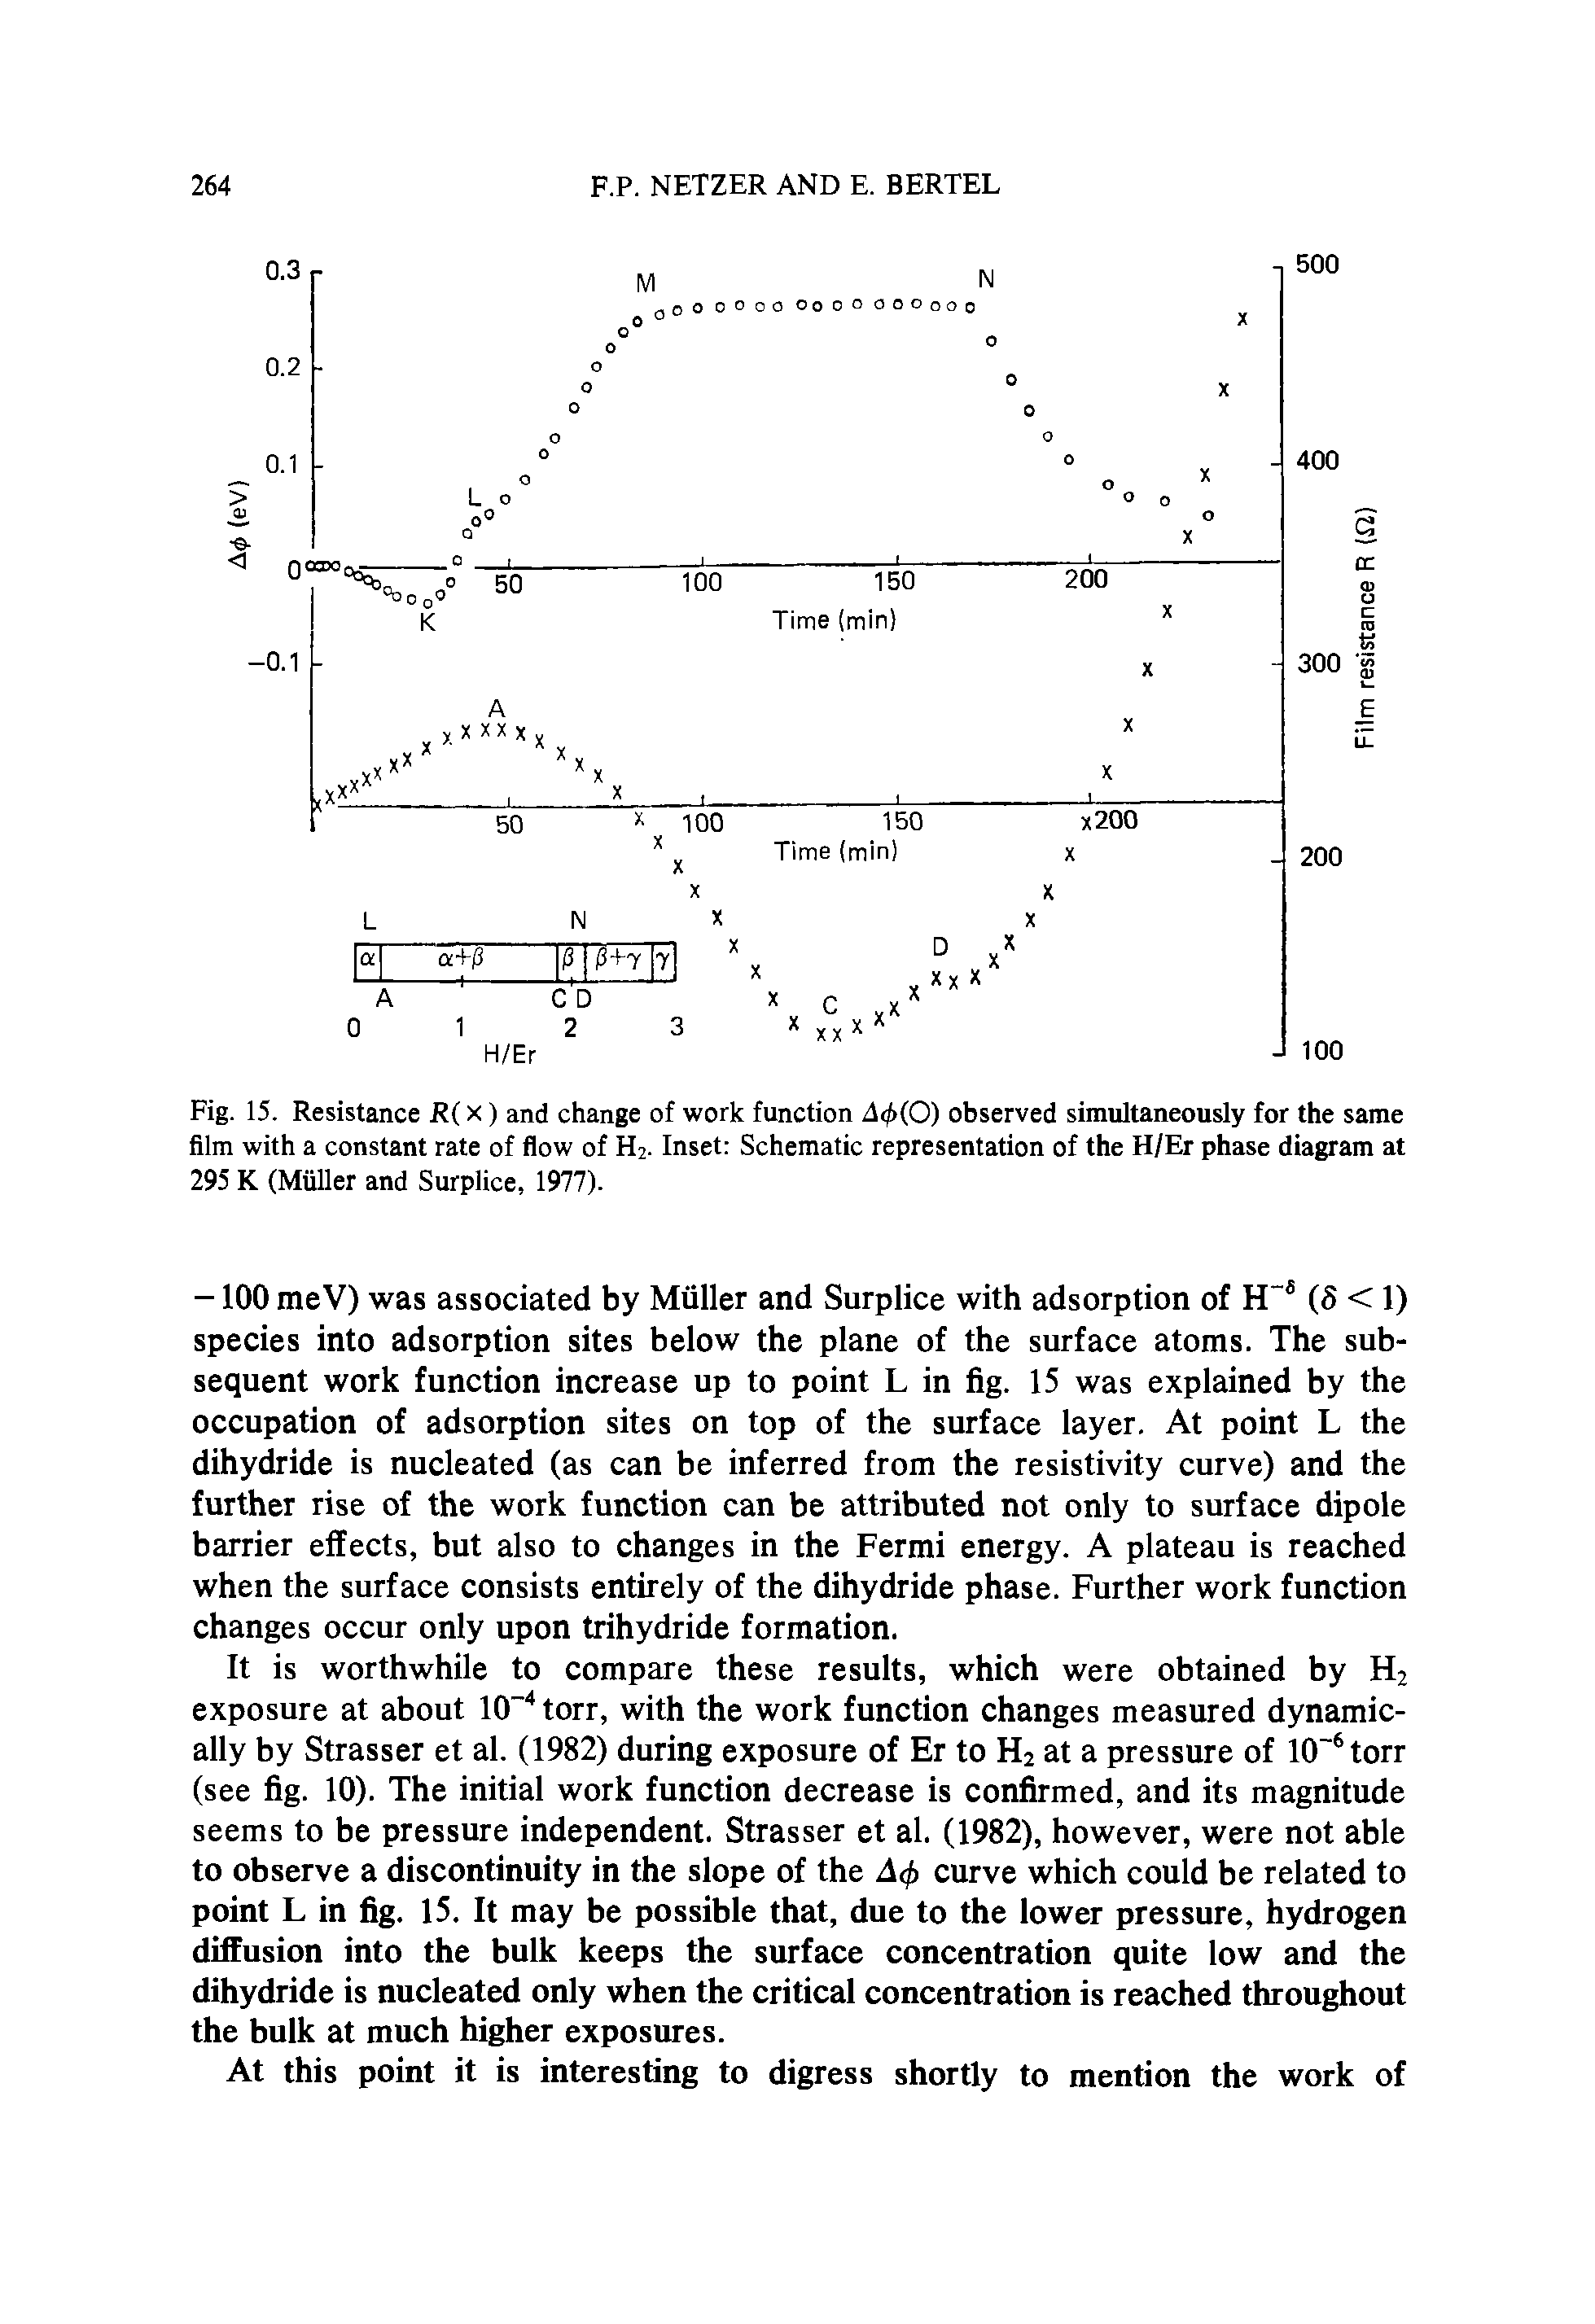 Fig. 15. Resistance R( x) and change of work function 4( (0) observed simnltaneonsly for the same film with a constant rate of flow of H2. Inset Schematic representation of the H/Er phase diagram at 295 K (Muller and Surplice, 1977).